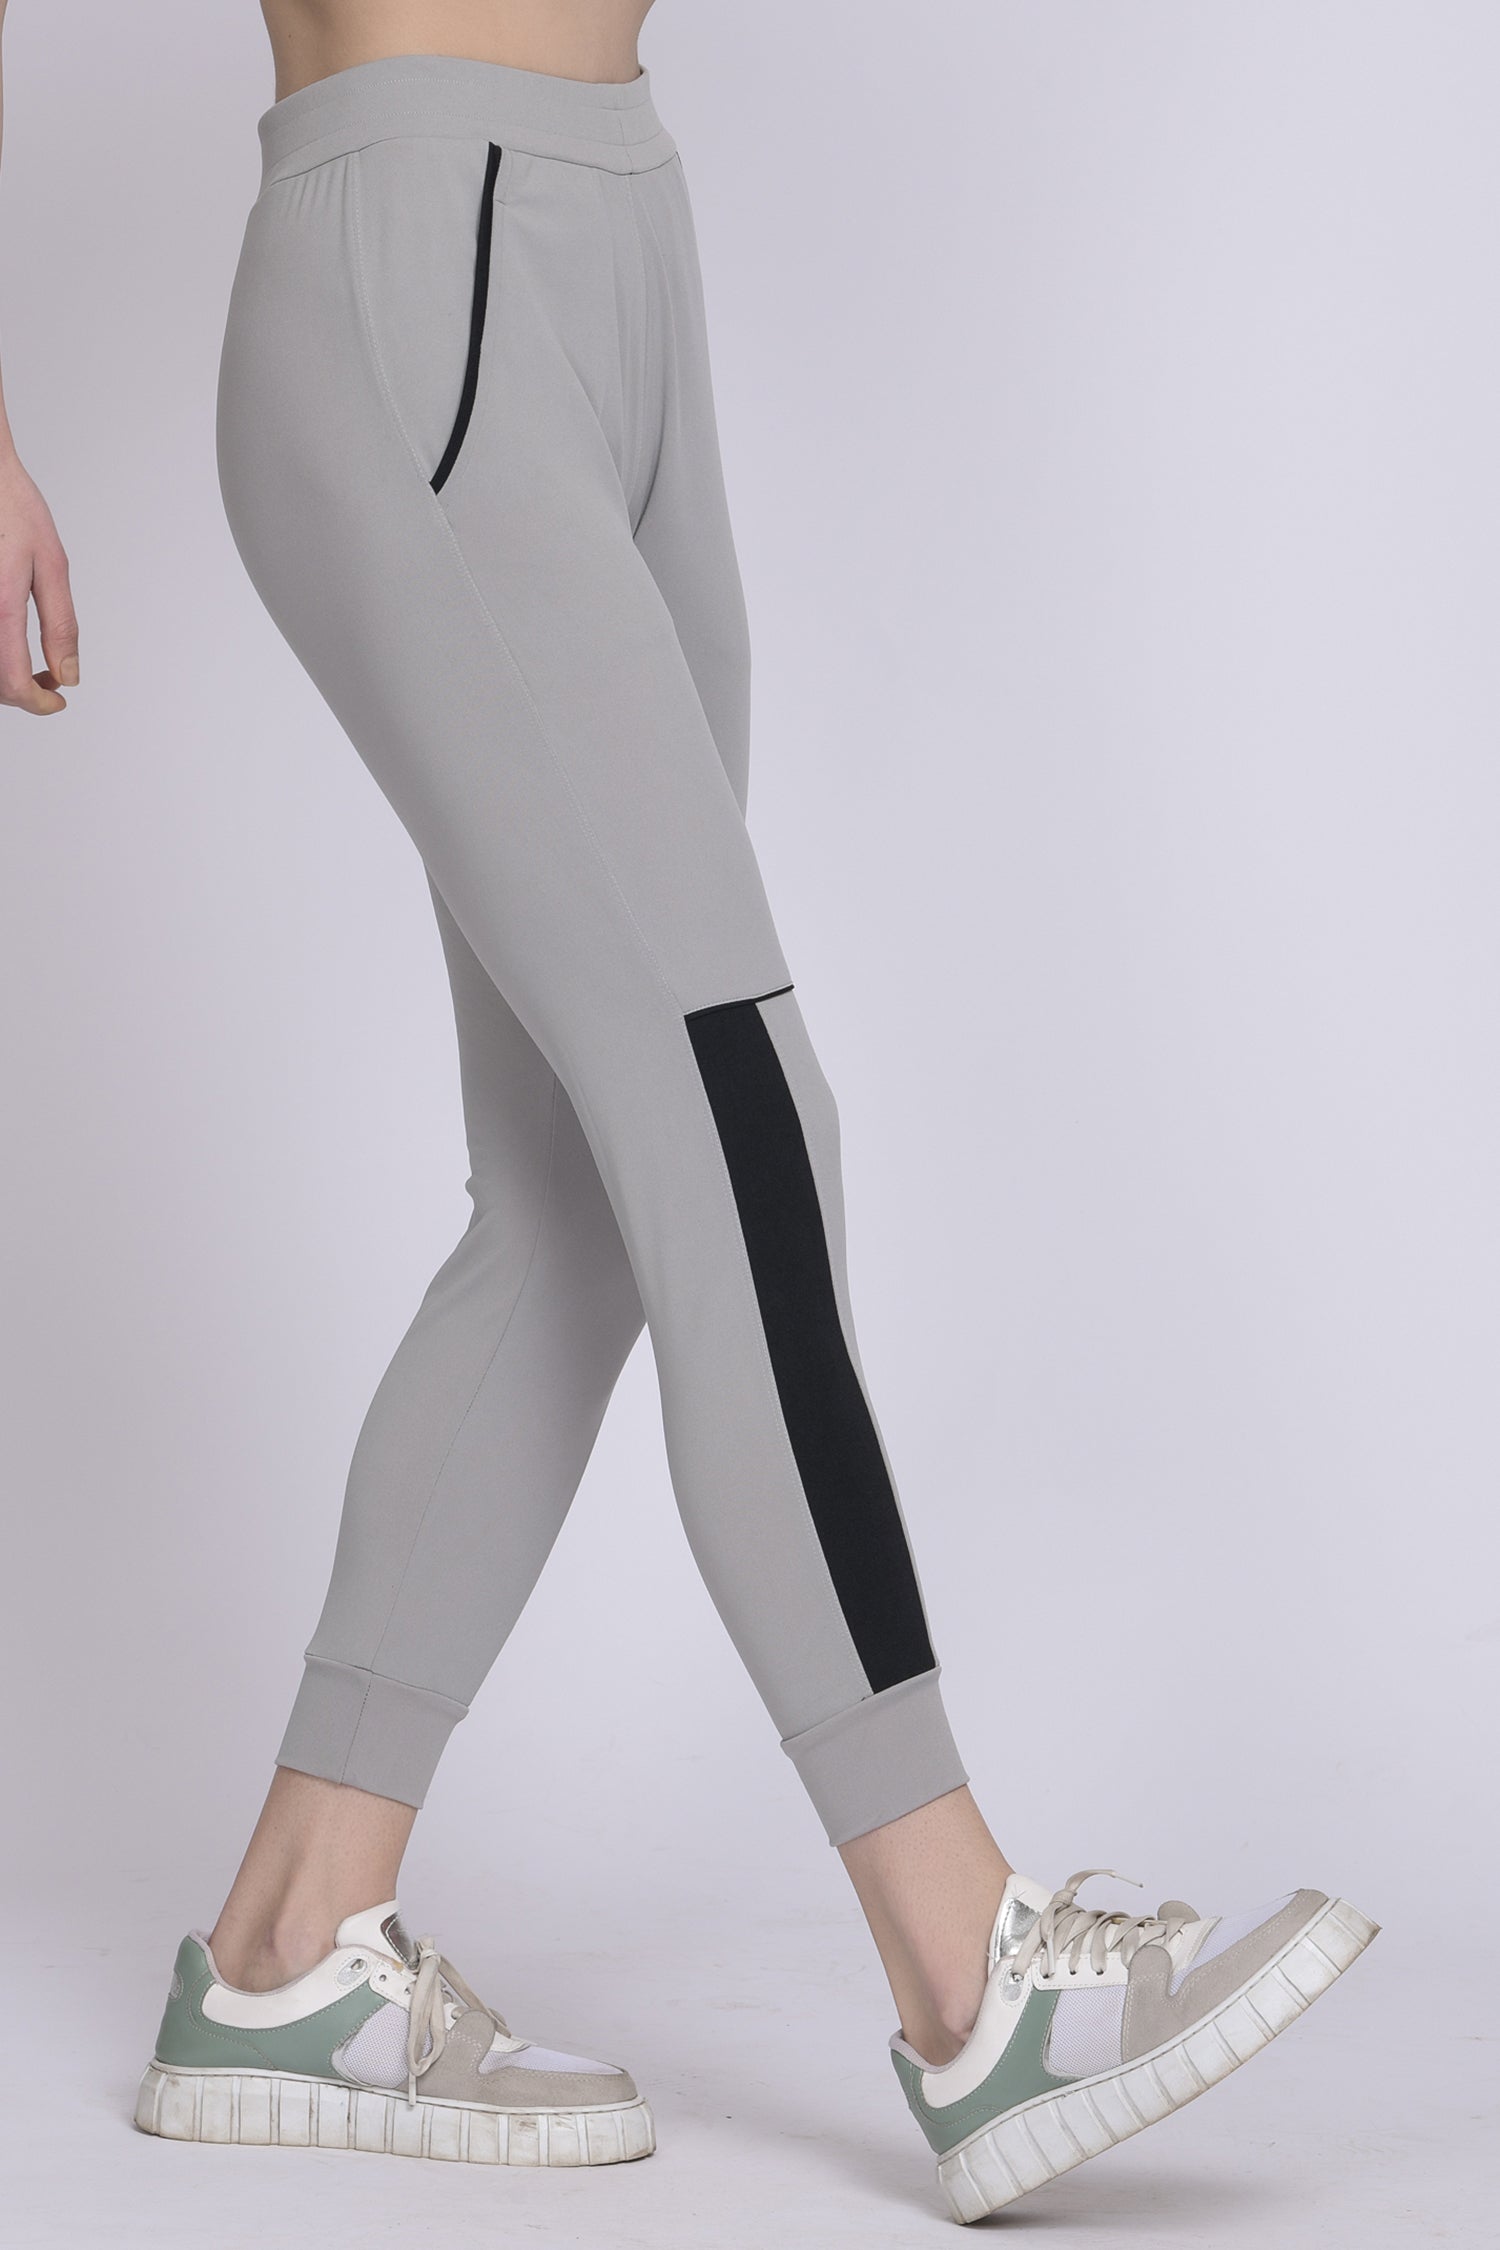 Modeve Grey and Light Grey Solid Cotton Blend Women Track Pants Combos –  Pinfash.com